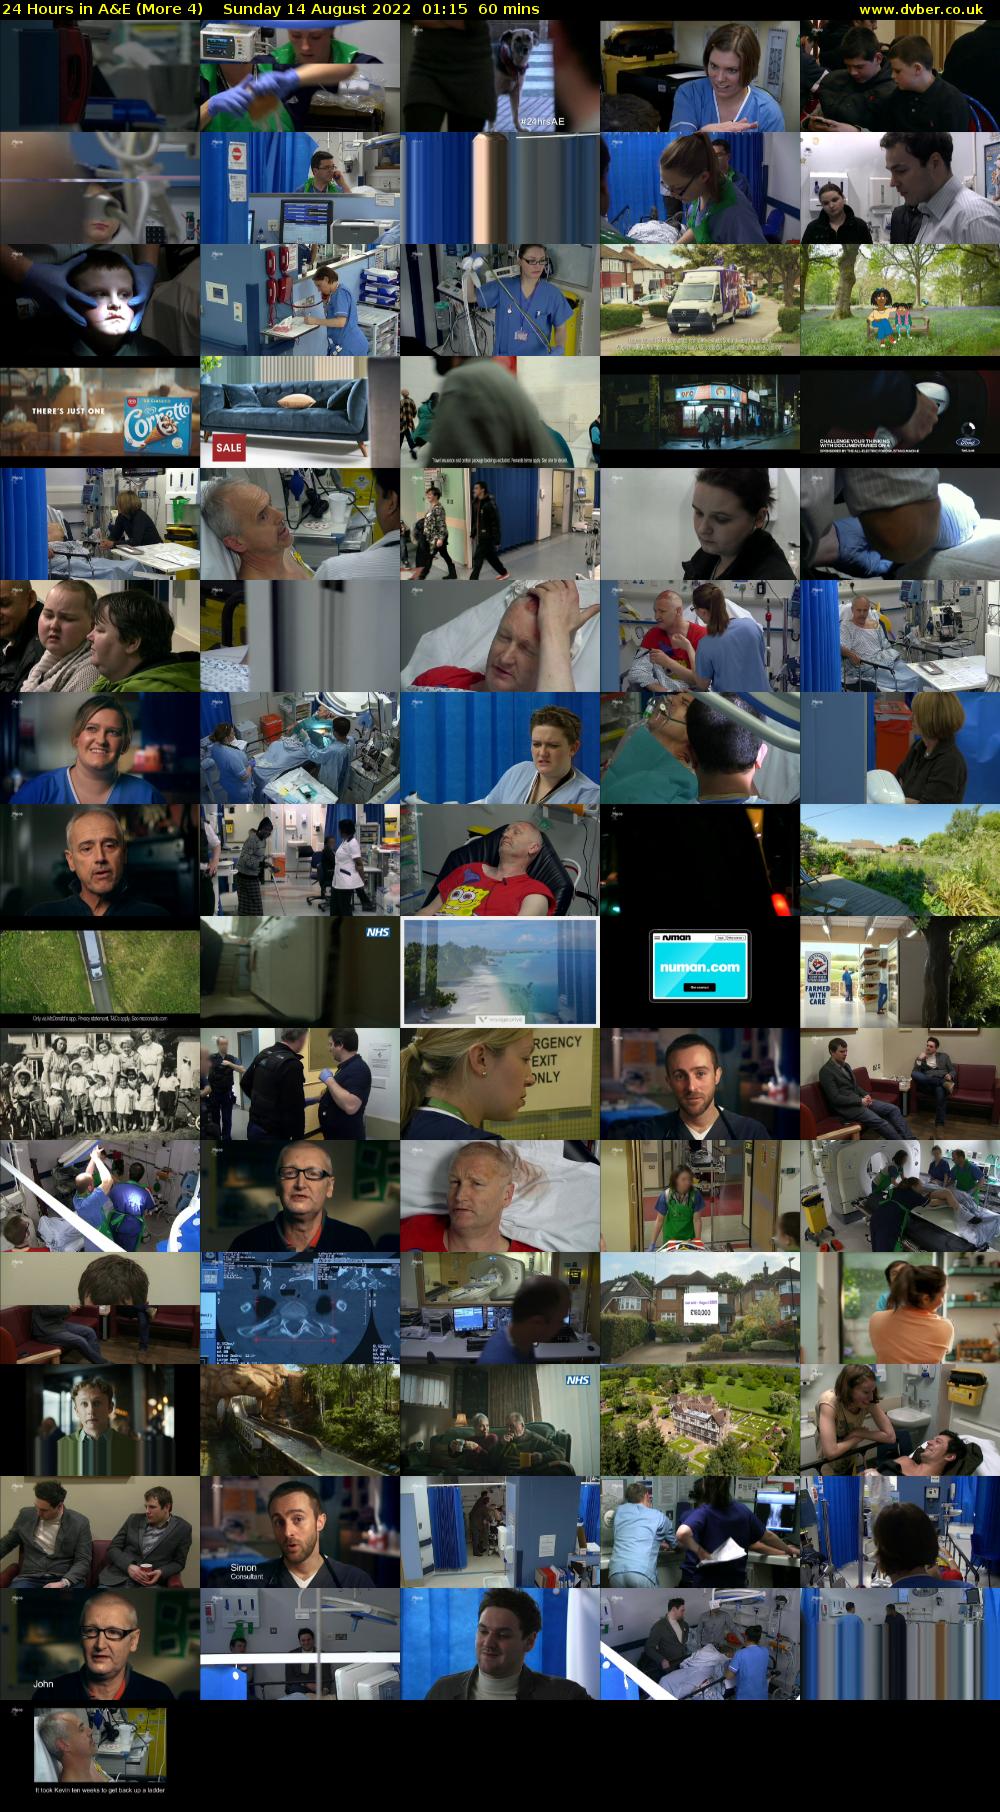 24 Hours in A&E (More 4) Sunday 14 August 2022 01:15 - 02:15